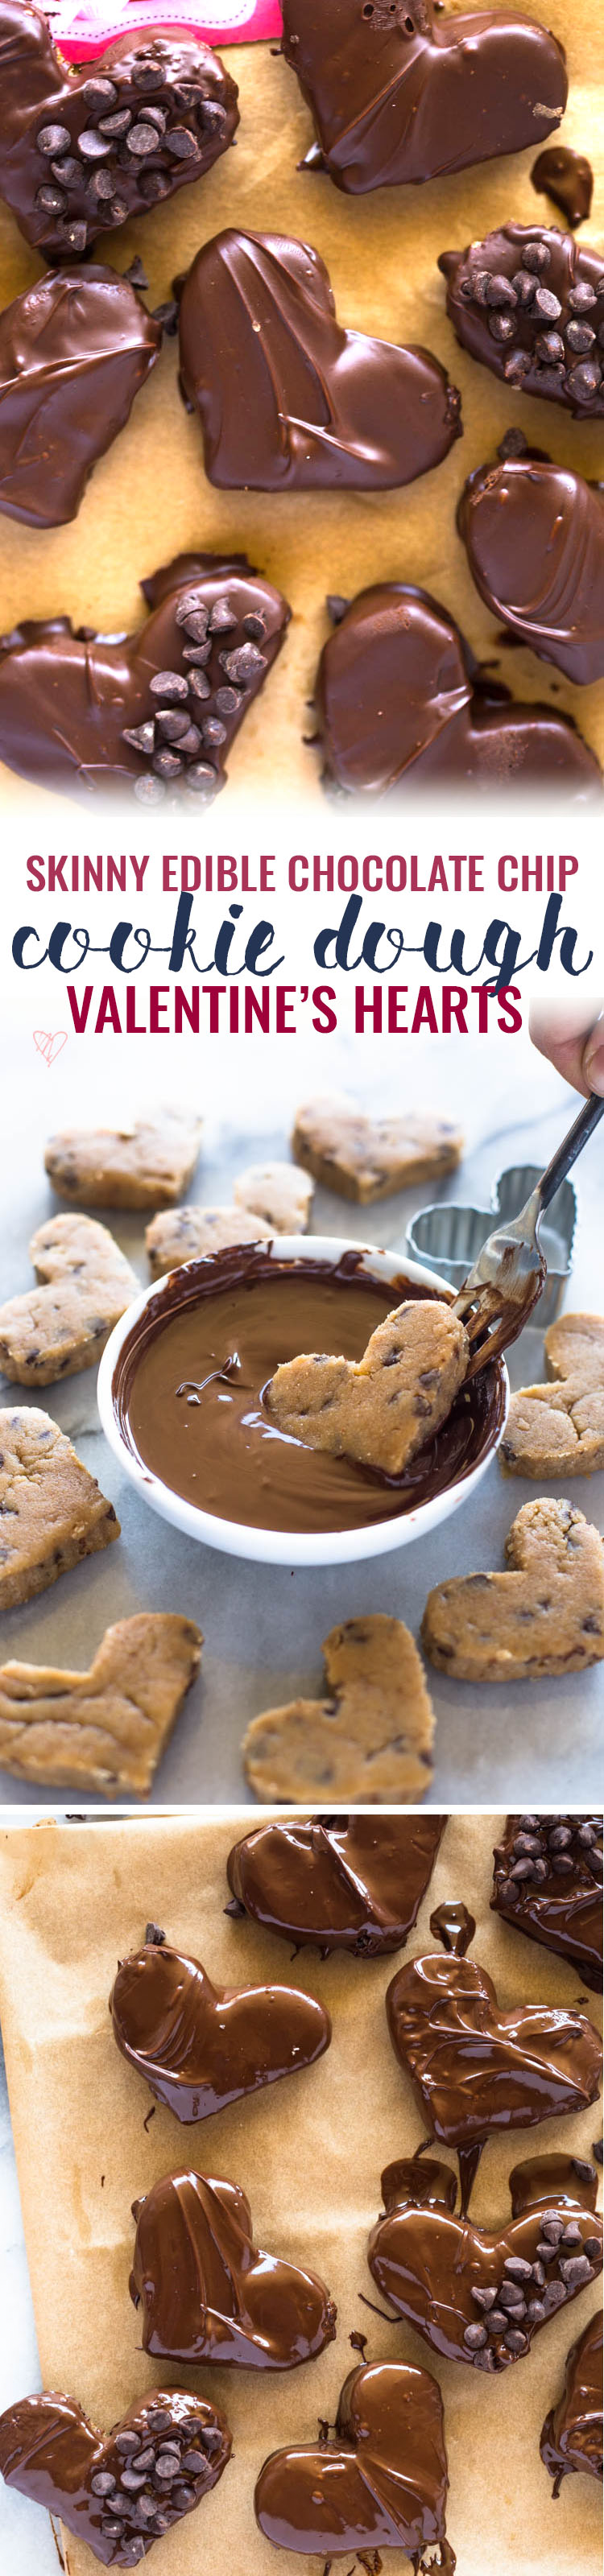 Skinny Edible Chocolate Chip Cookie Dough Hearts